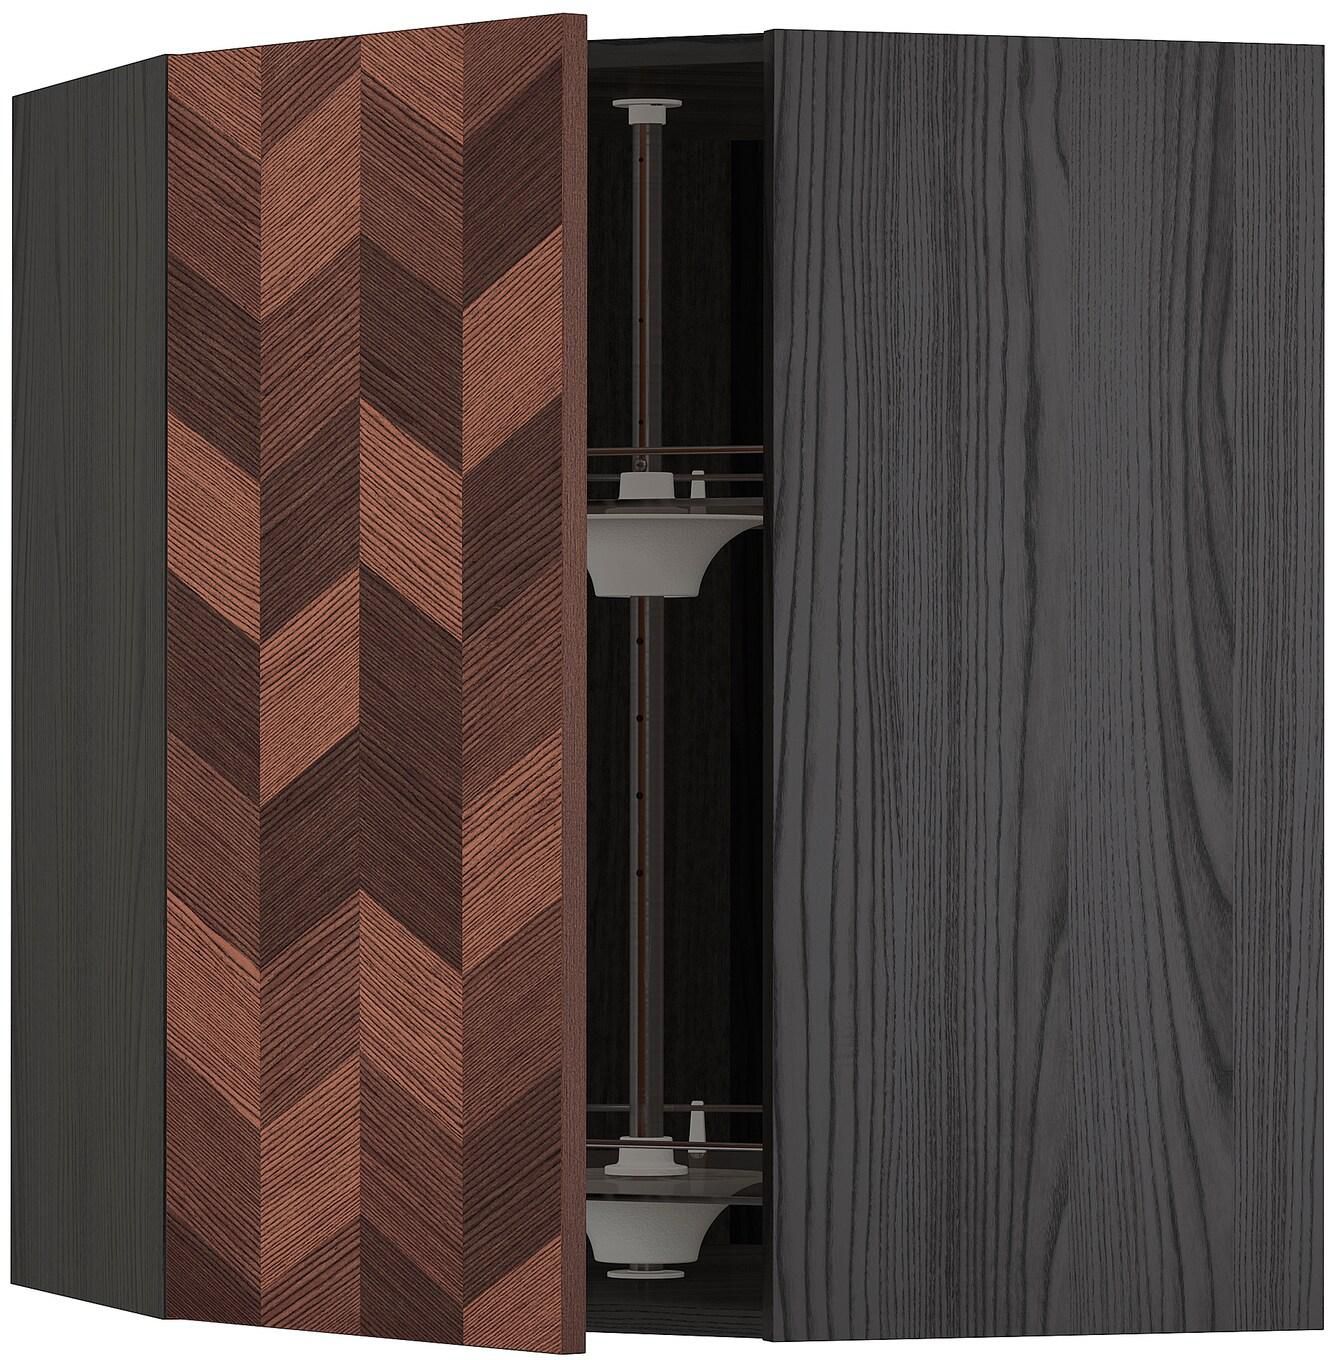 METOD Corner wall cabinet with carousel - black Hasslarp/brown patterned 68x80 cm